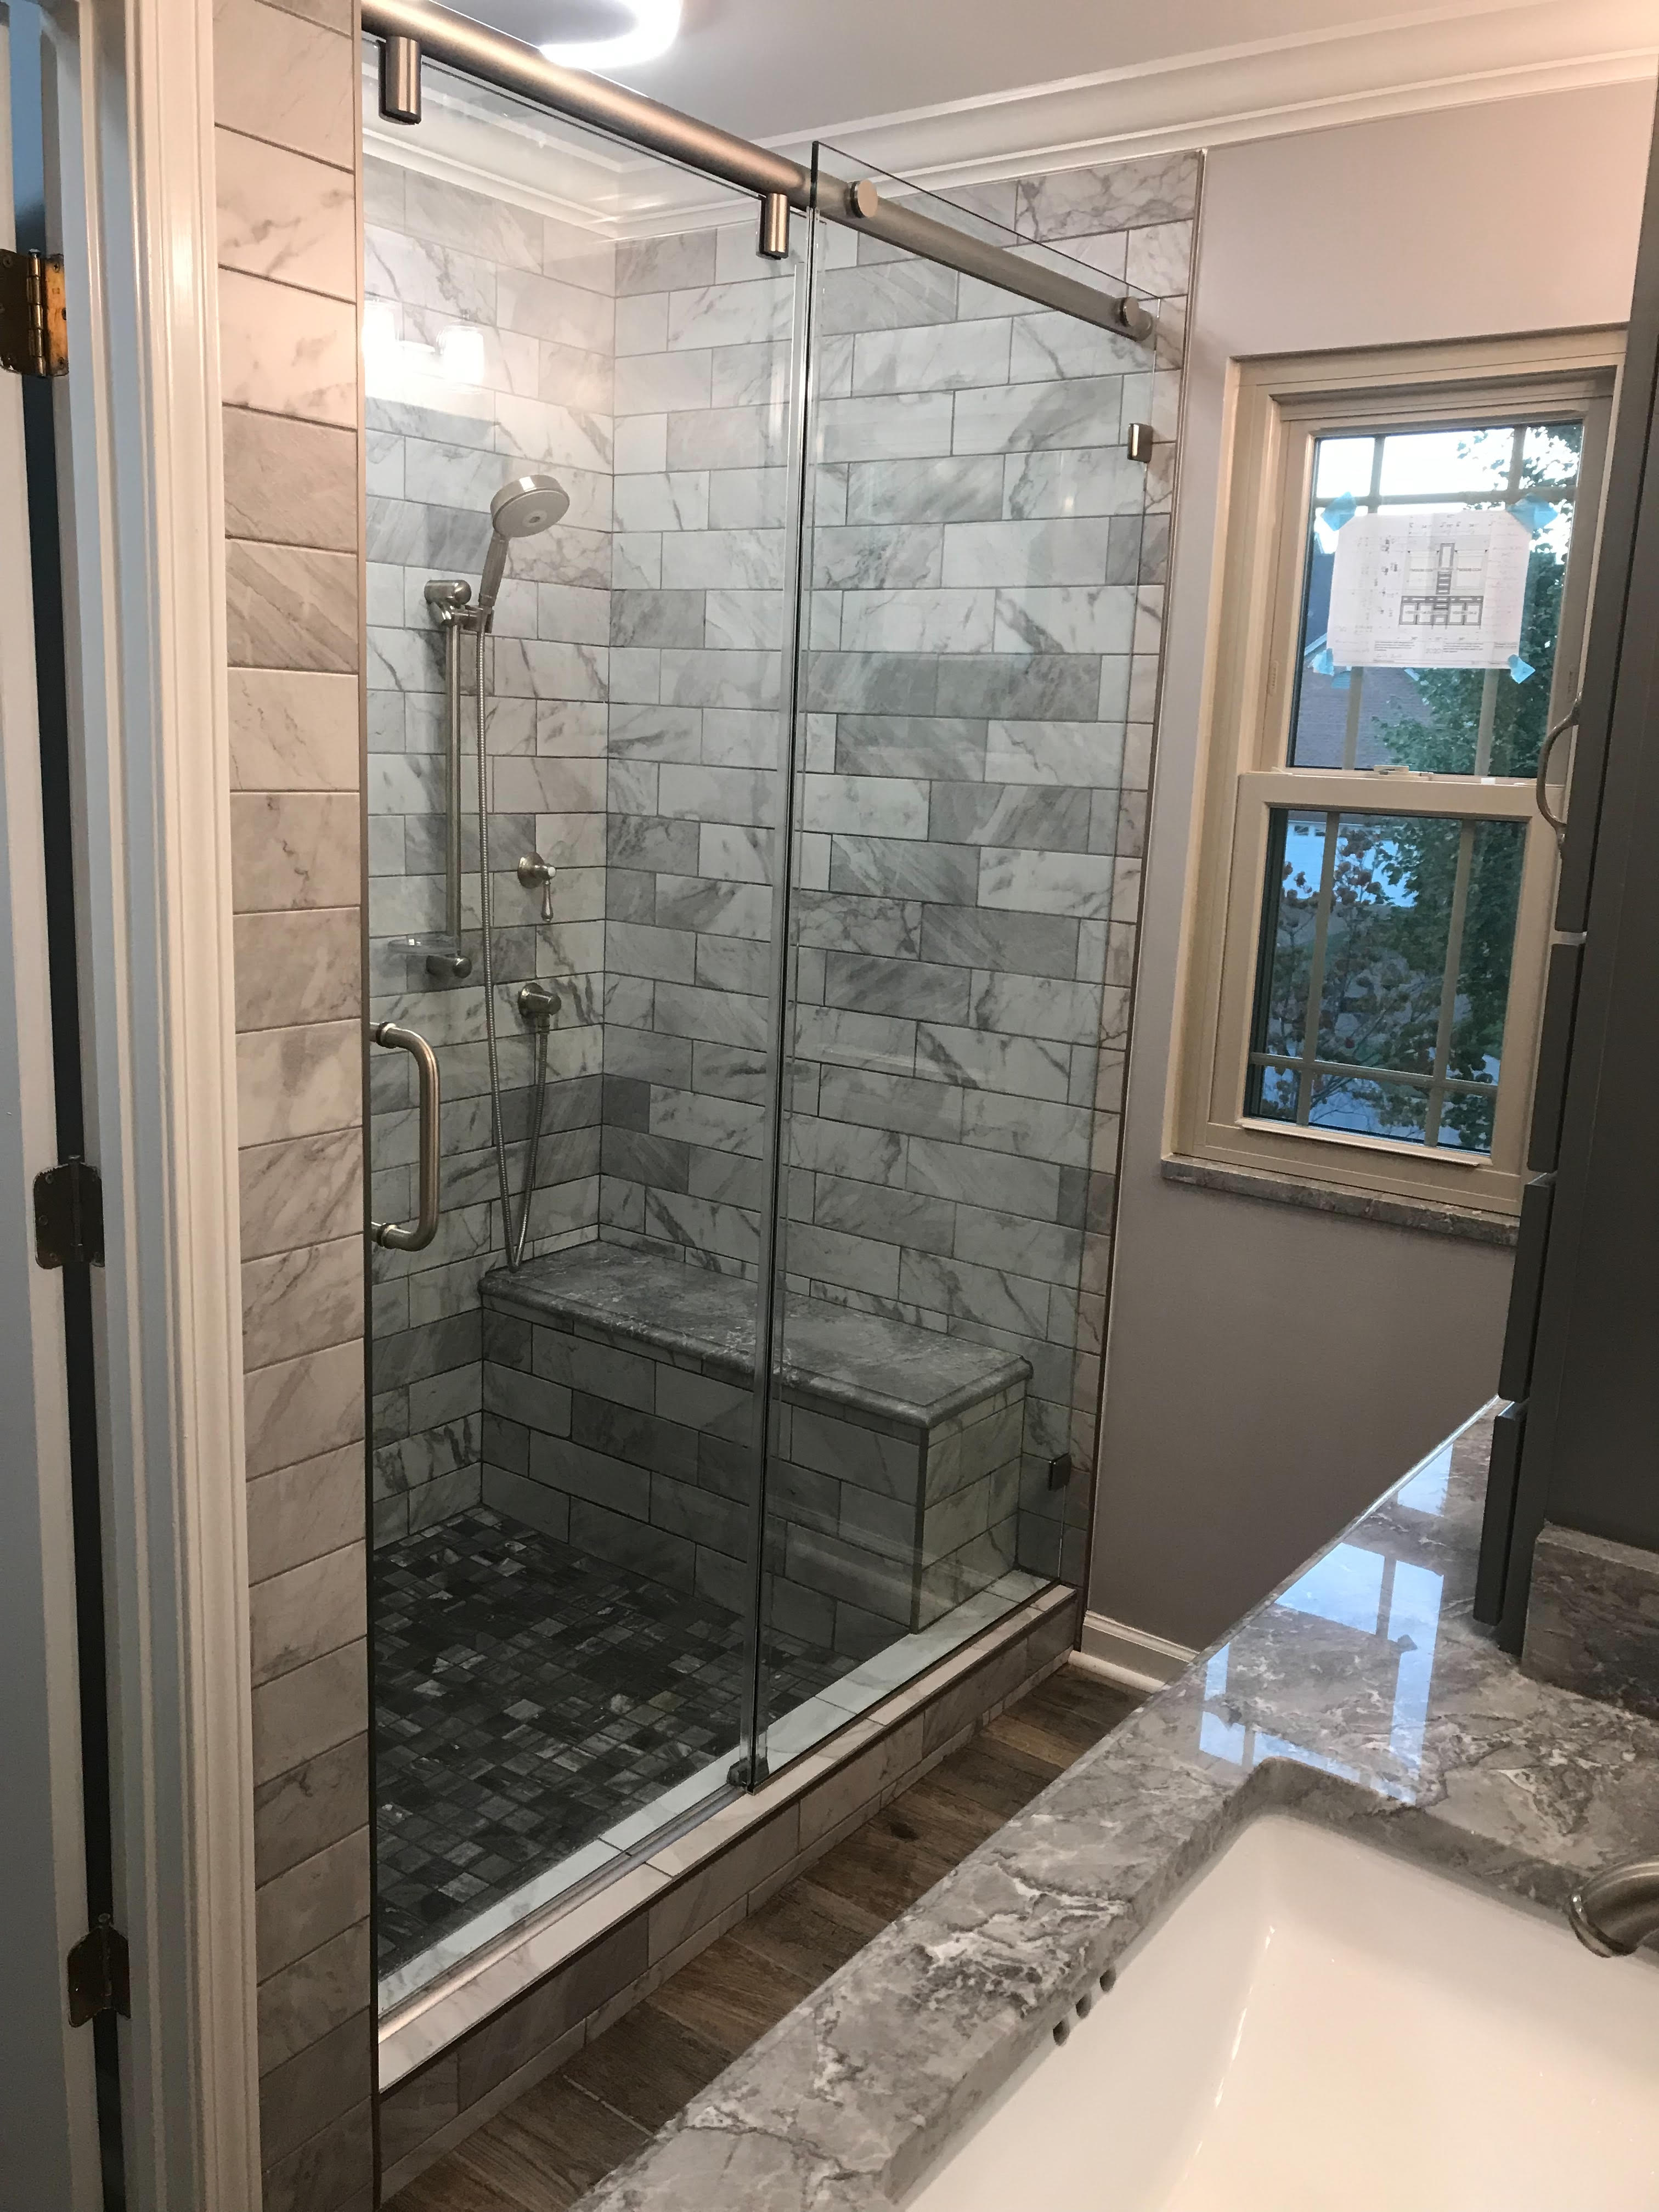 New shower with sitting area